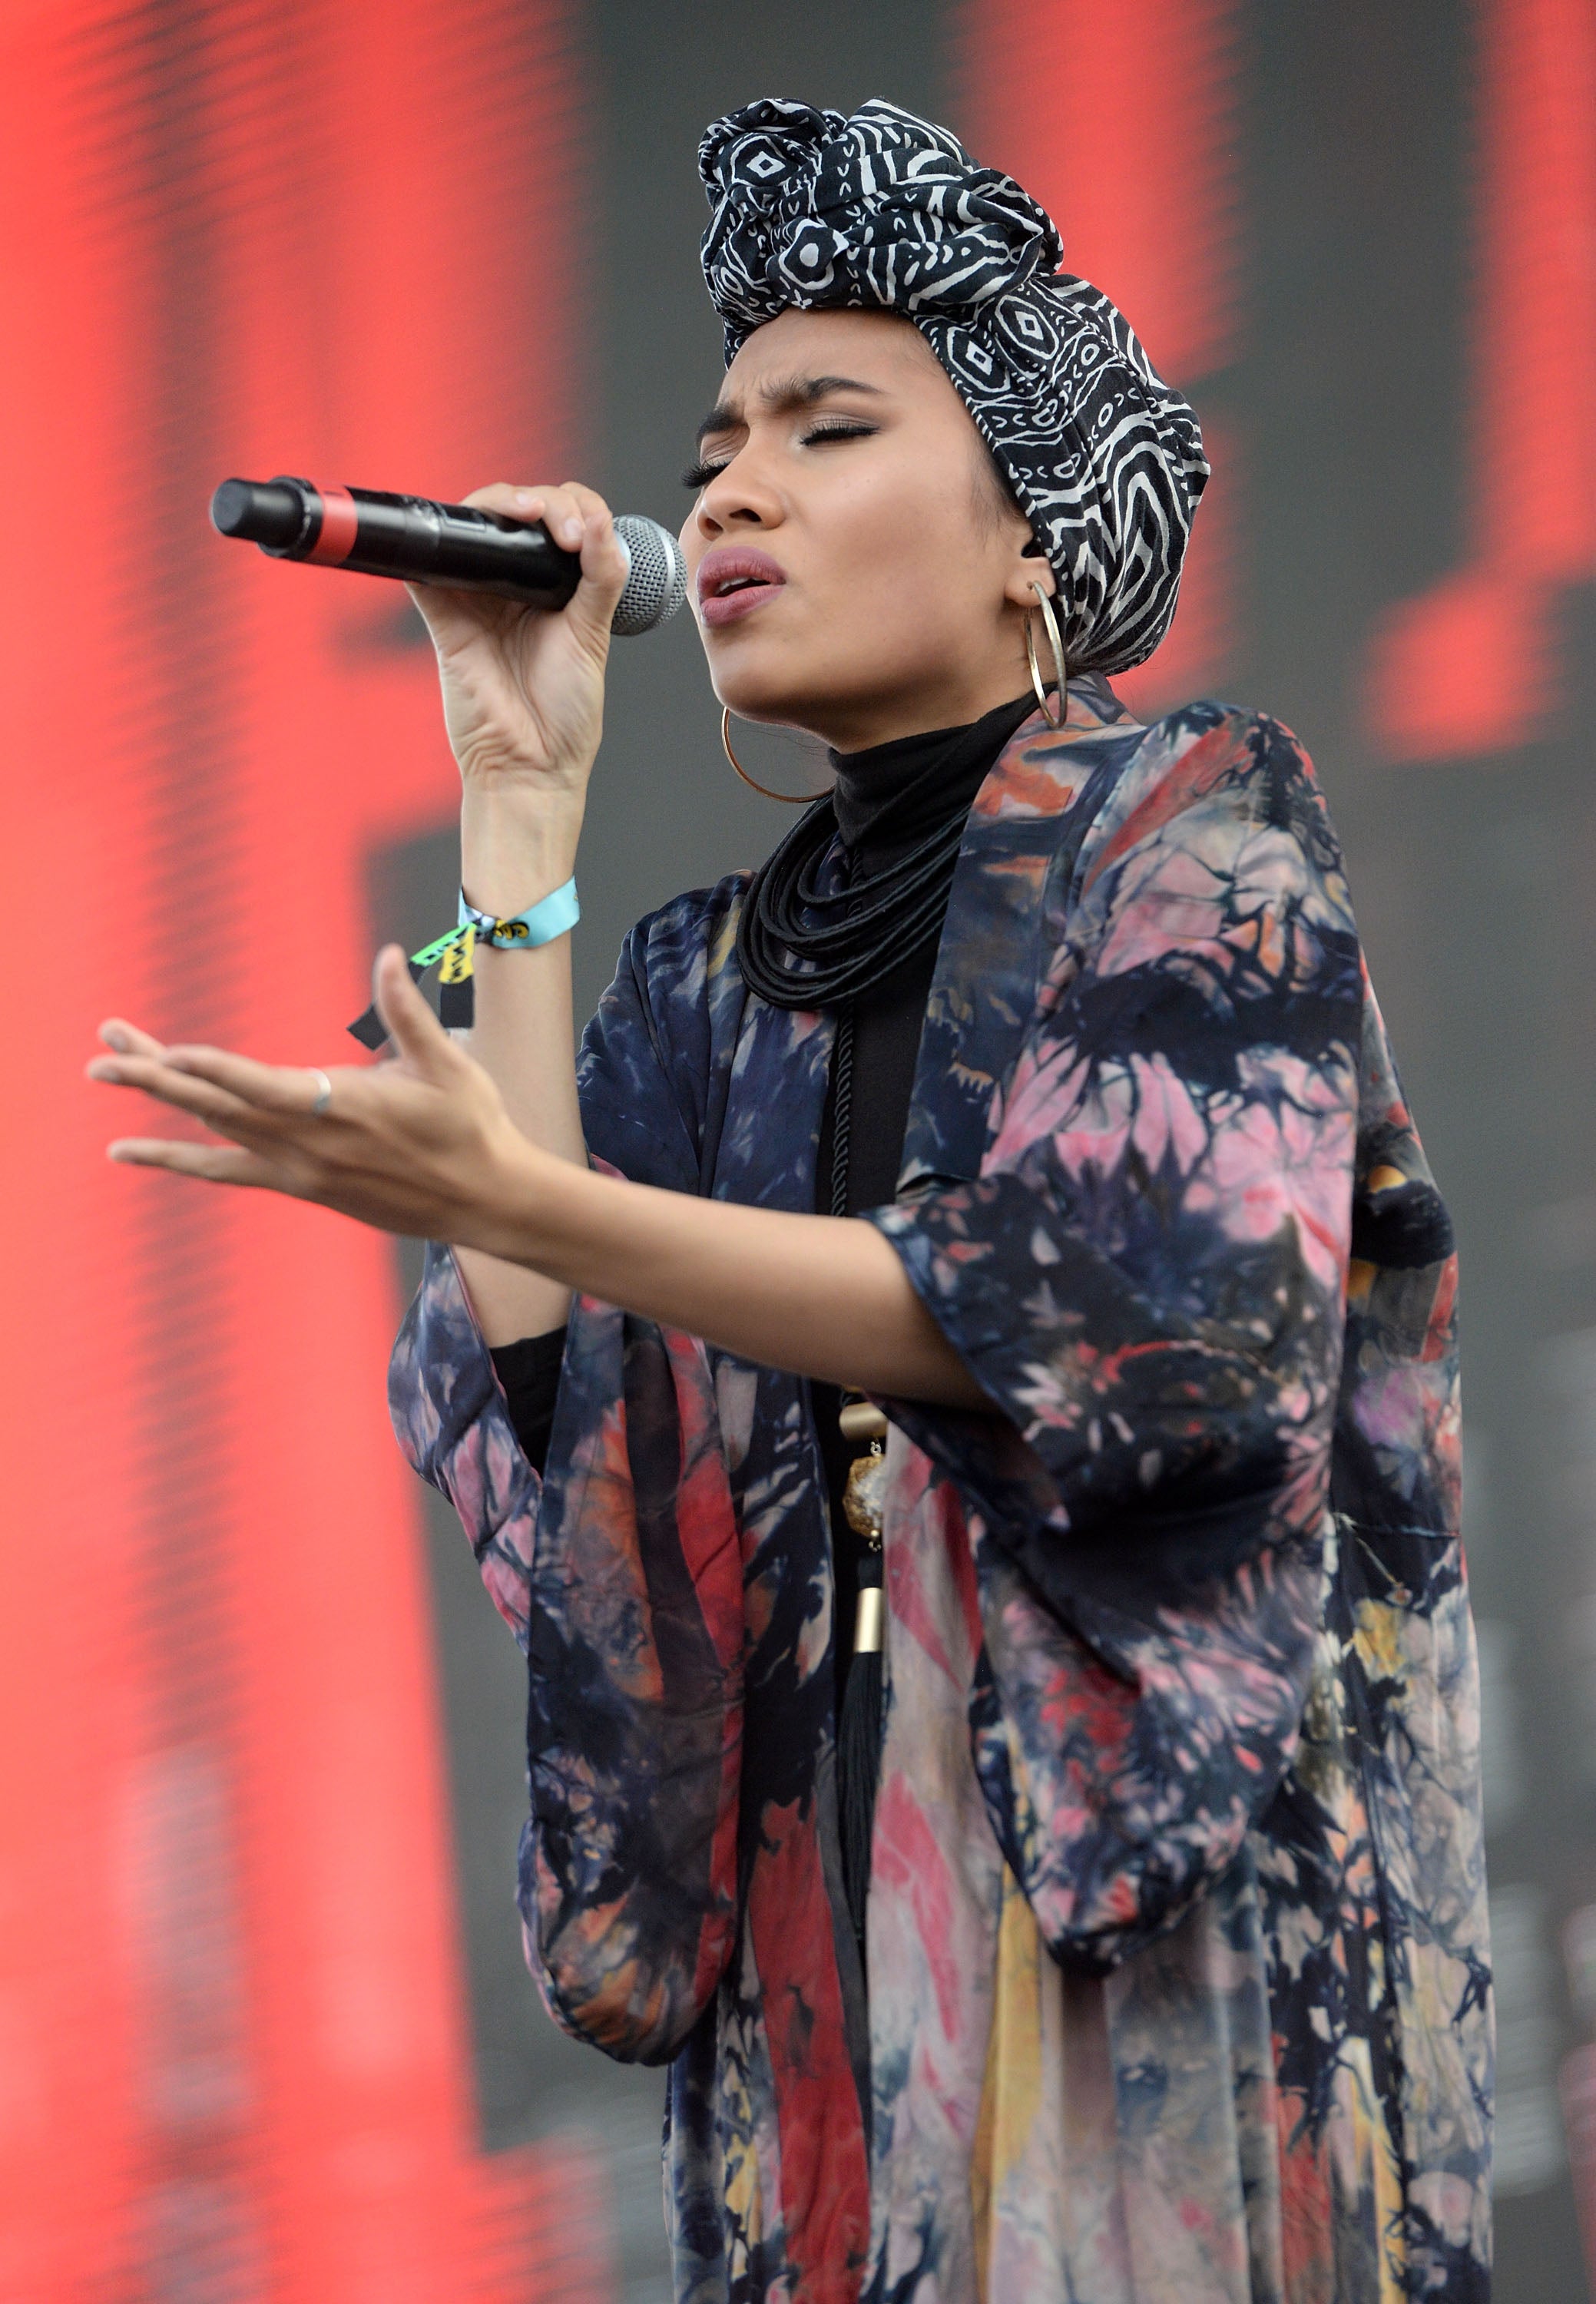 ESSENCE Festival Performer Yuna Tackles Love’s Greatest Challenge In New Video For “Unrequited Love”